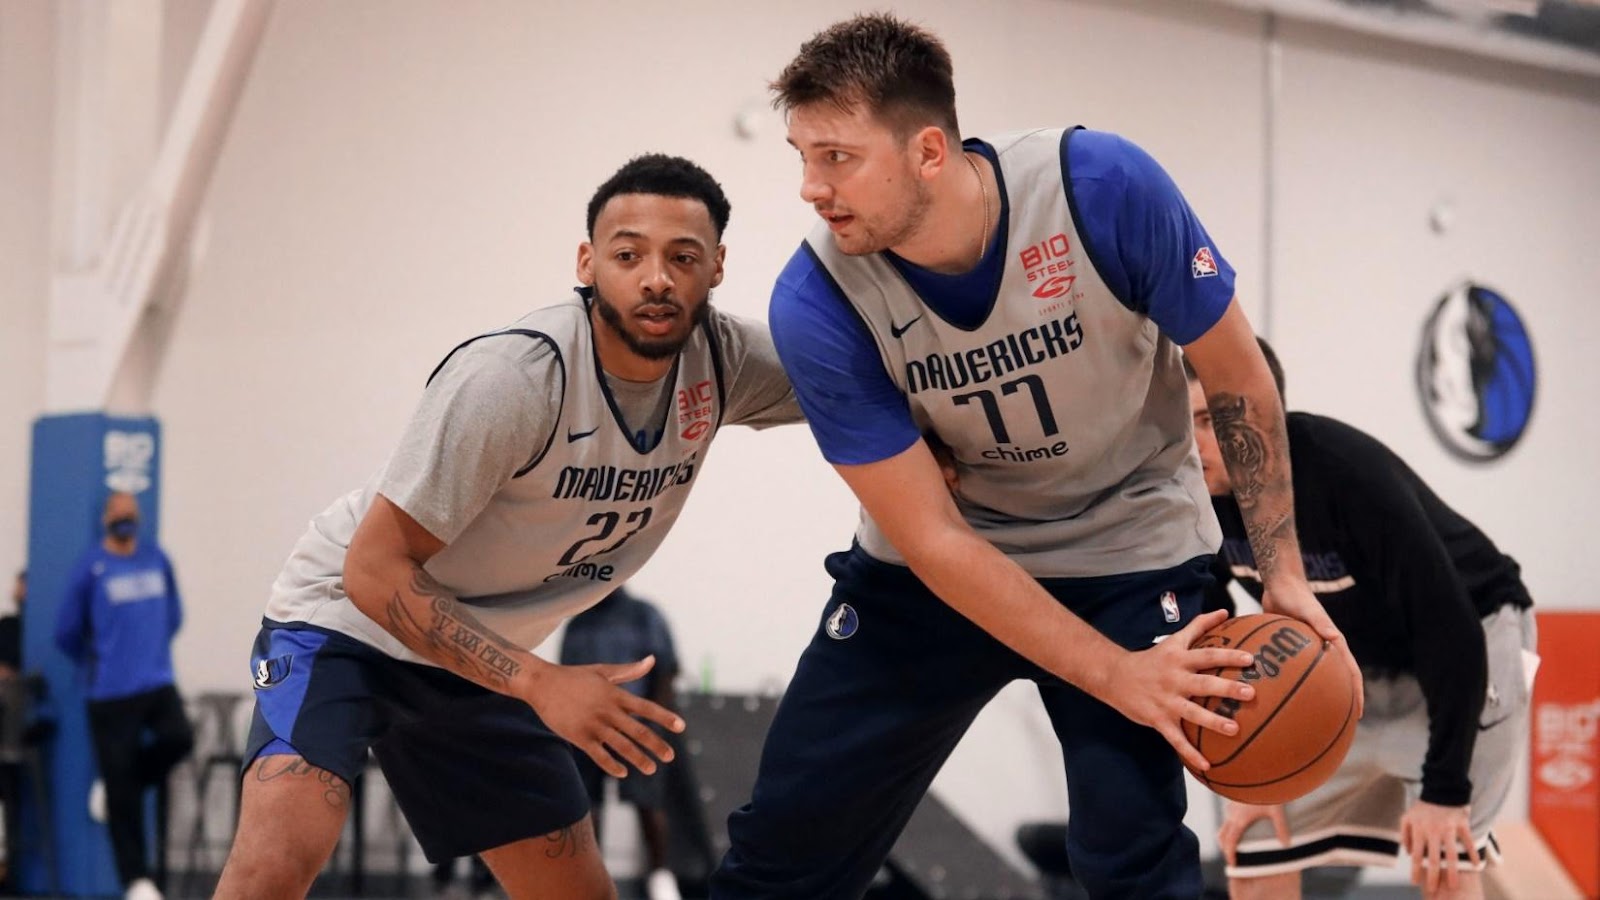 Sights and sounds from Day 5 of training camps across NBA | NBA.com